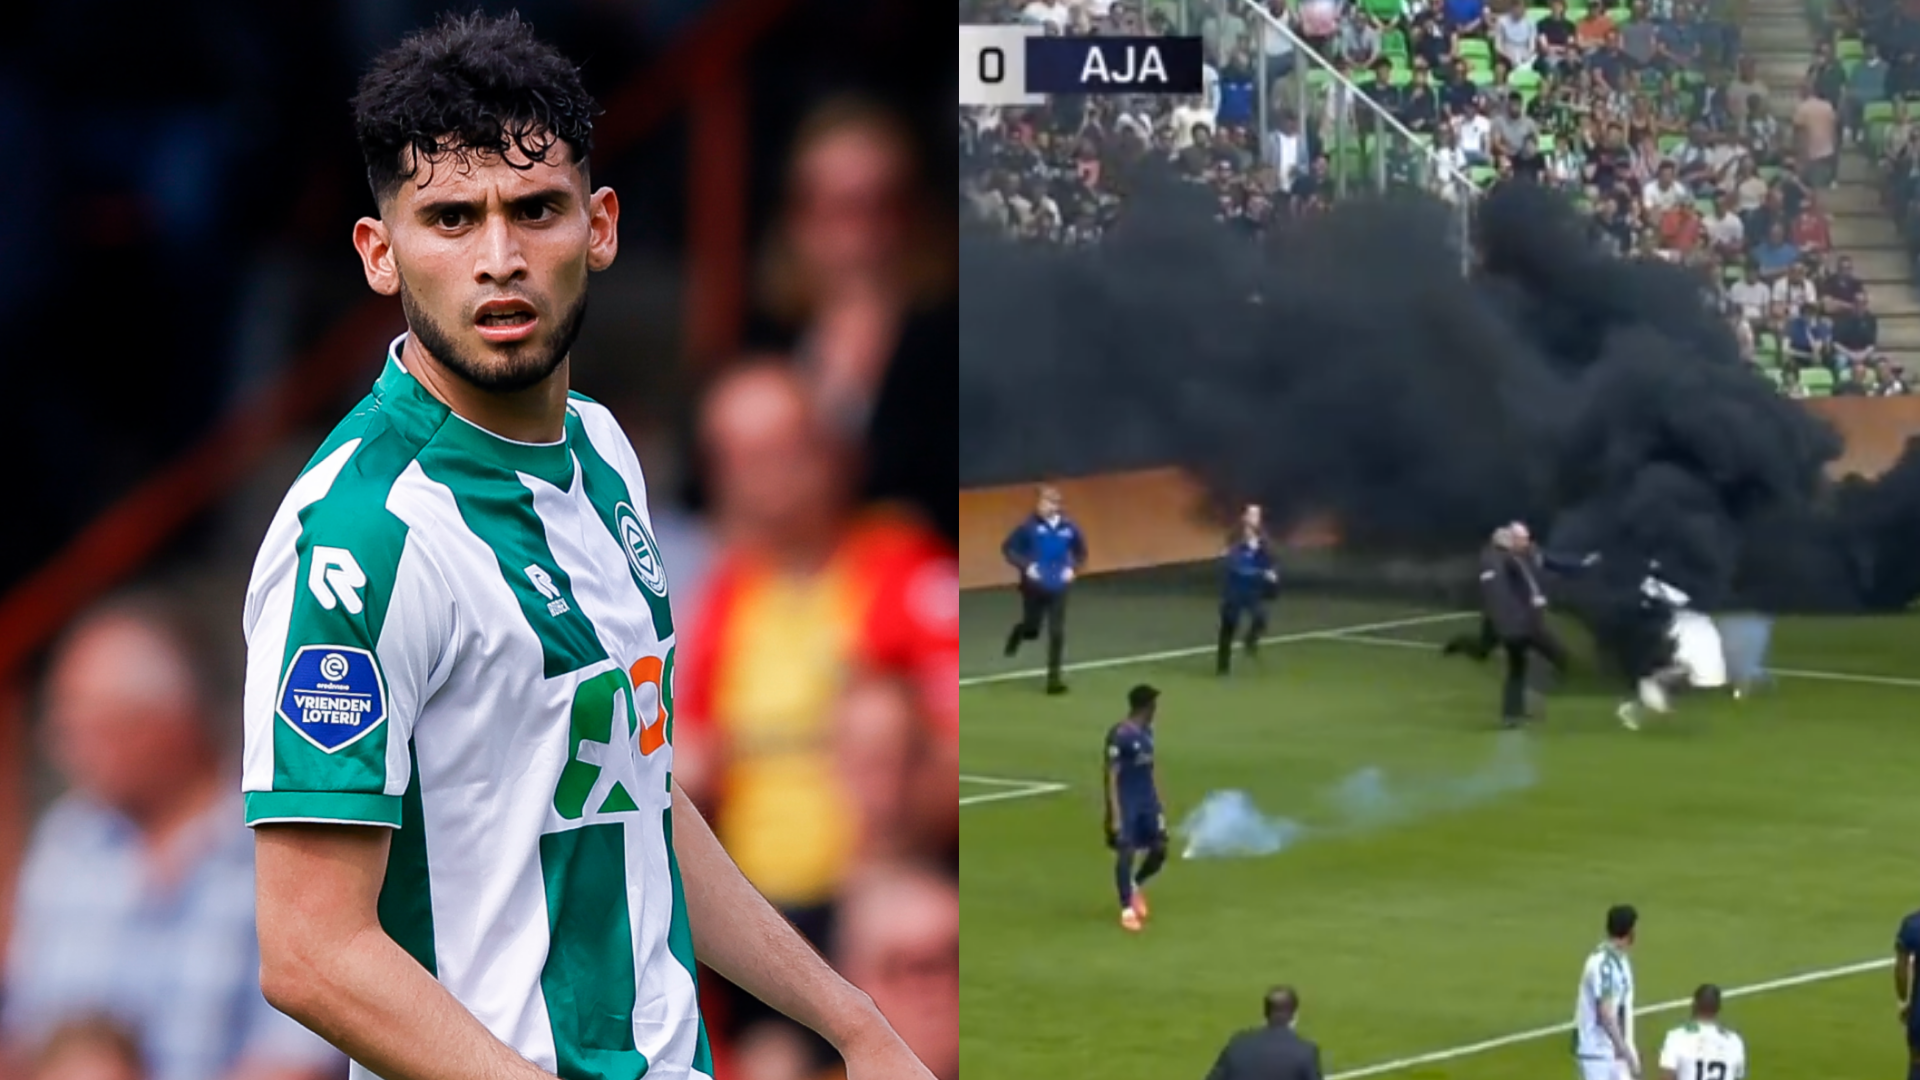 Ricardo Pepis Groningen see match against Ajax abandoned after protesting fans throw smoke bombs onto pitch Goal US